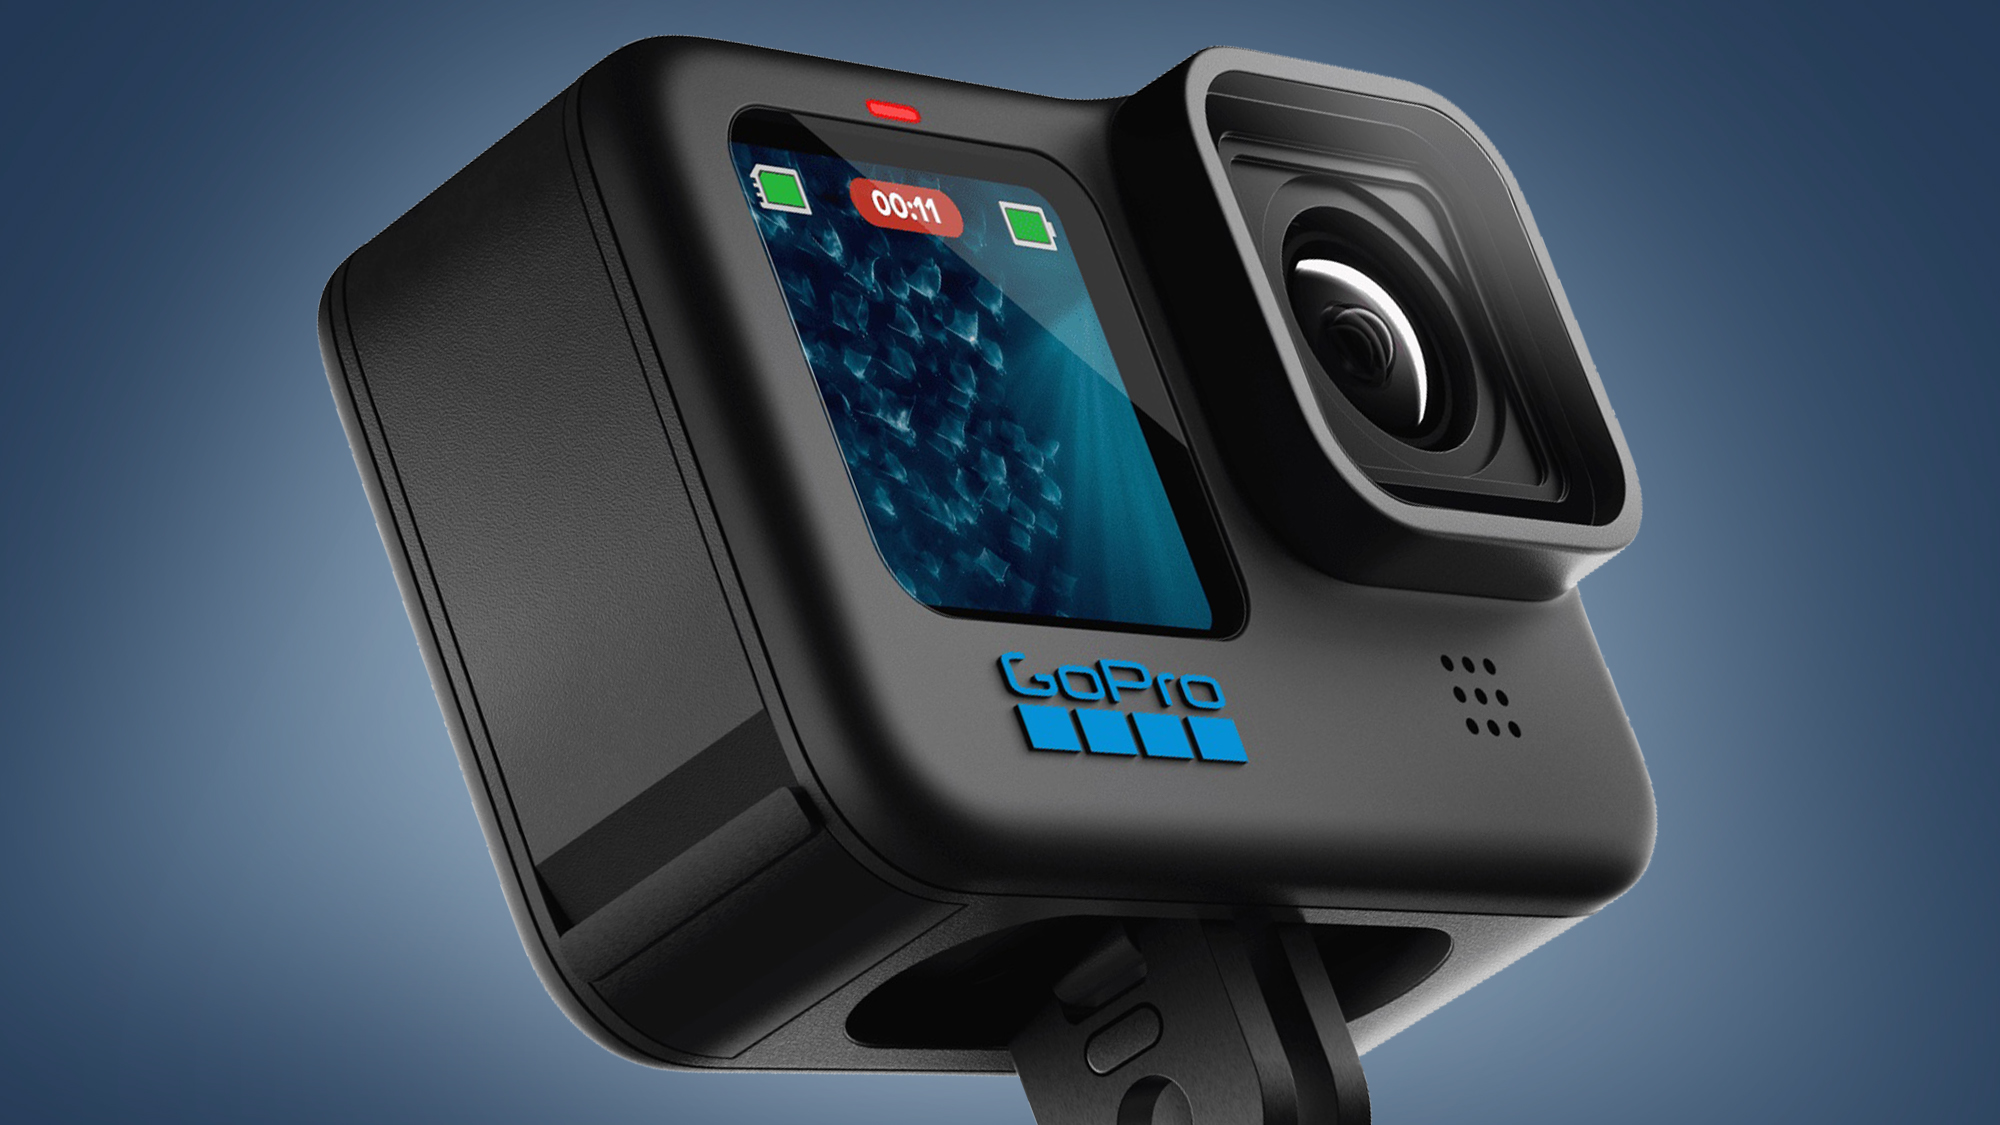 GoPro Hero 12 Black First Look - 15 NEW Features Explained +